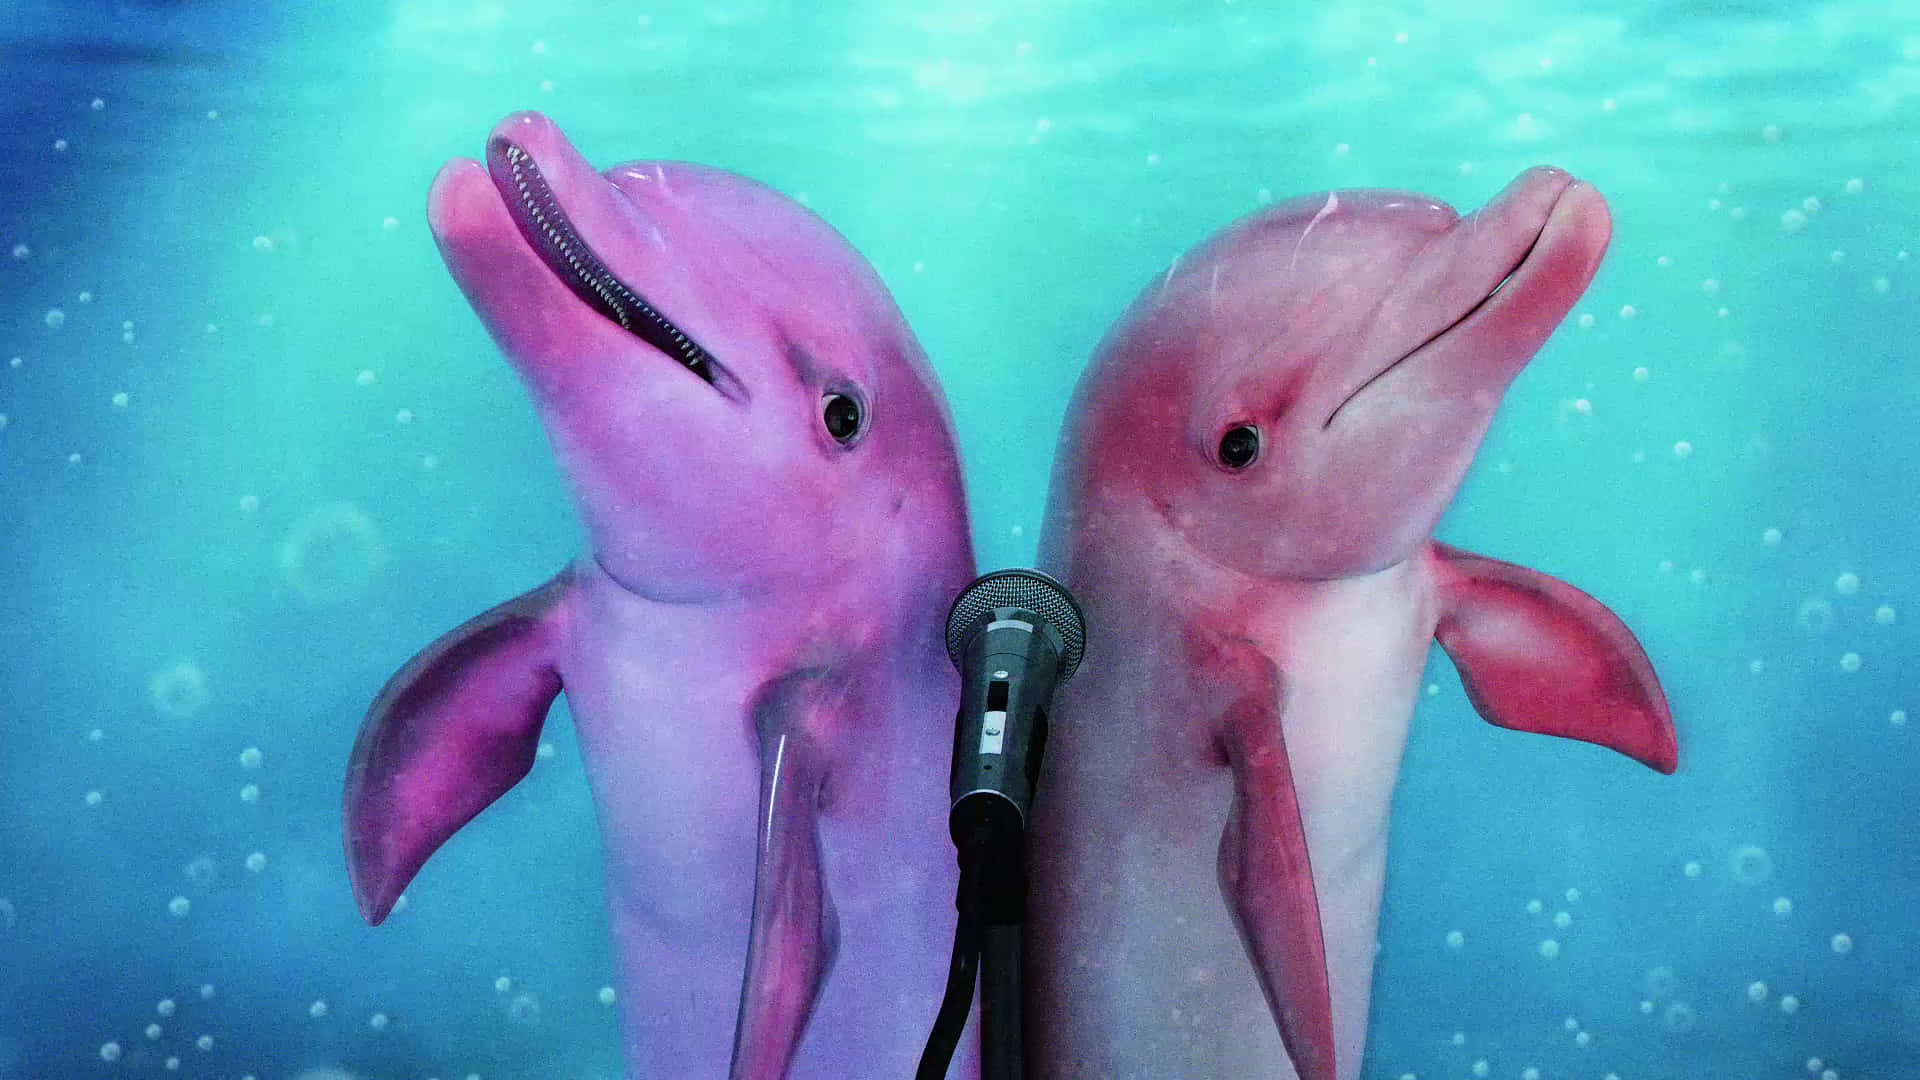 Two Dolphins Are Holding A Microphone In The Water Wallpaper